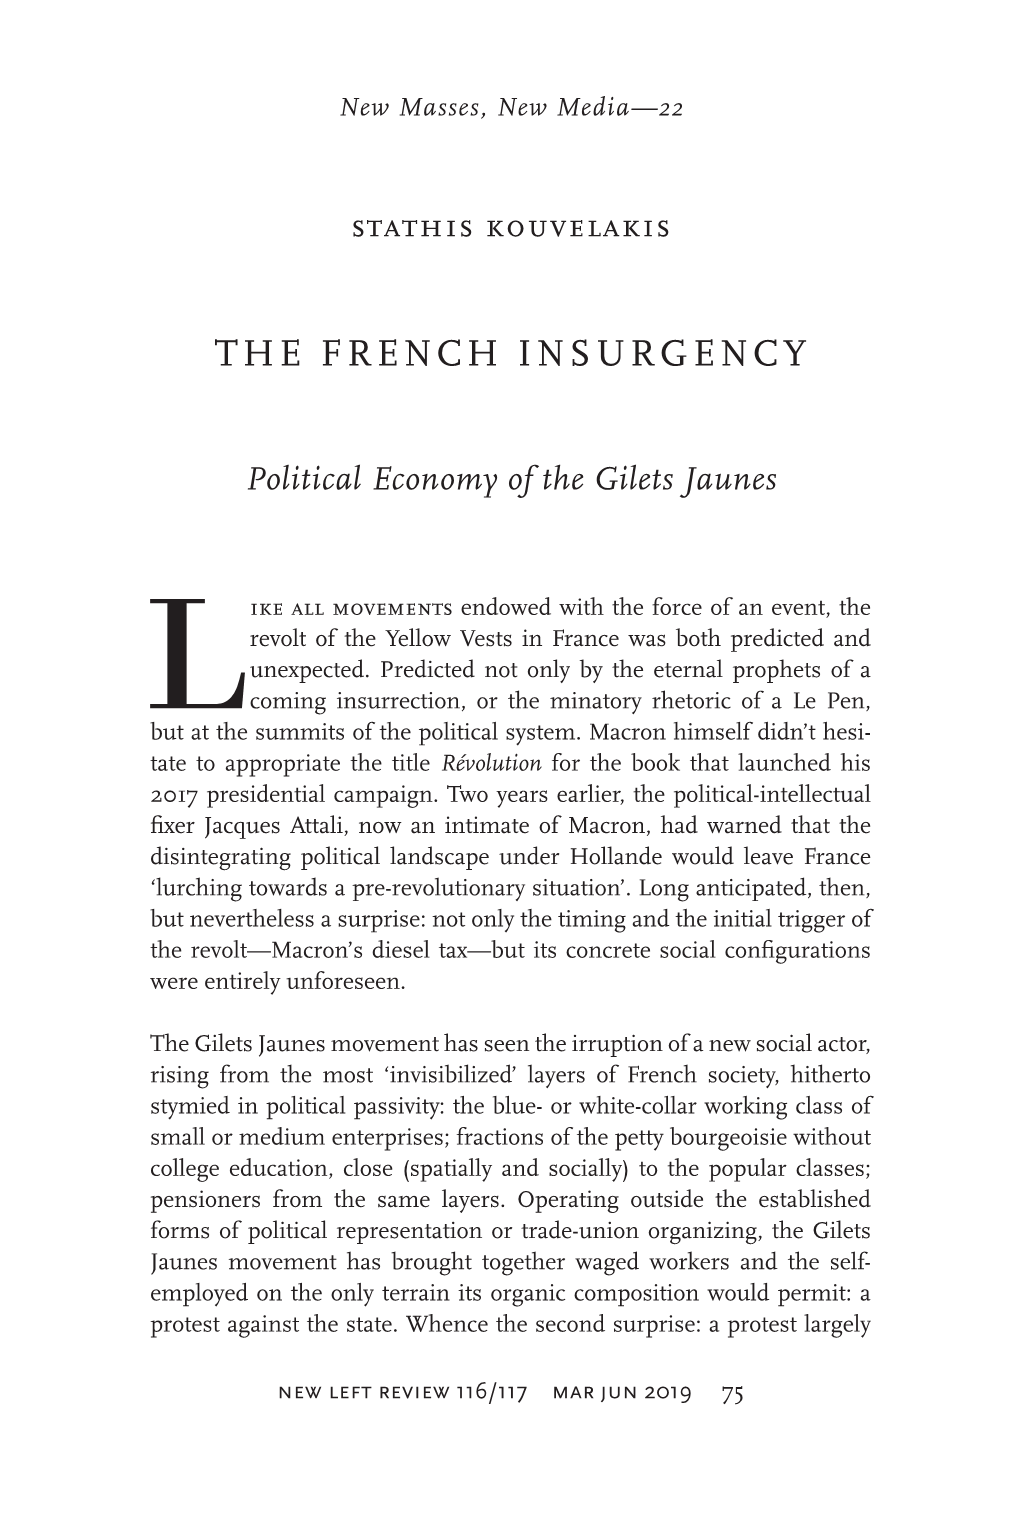 The French Insurgency